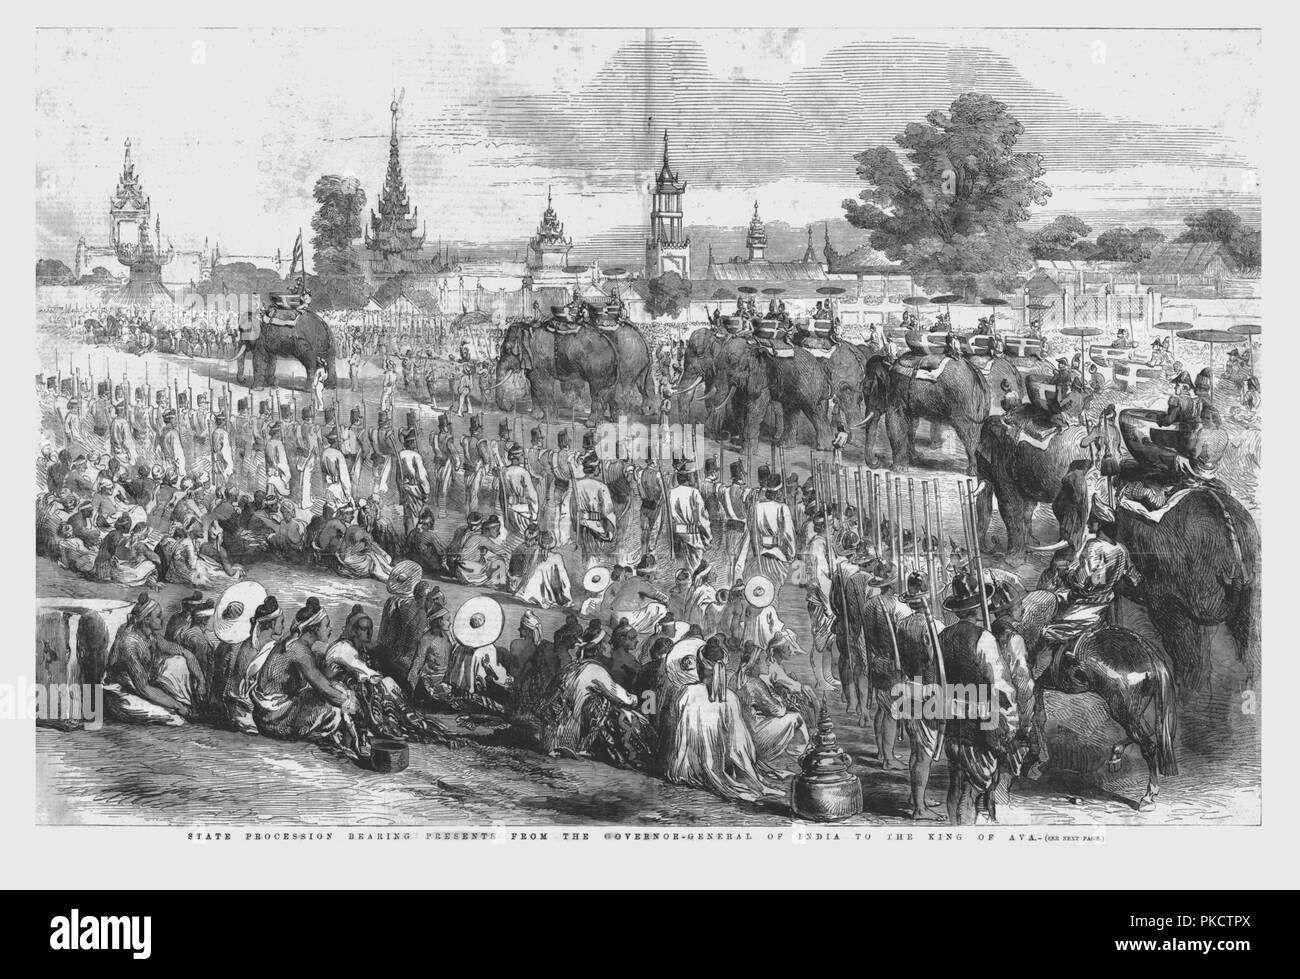 'State Procession Bearing Presents from the Governor-General of India to the King of Ava', 1856. Artist: Unknown. Stock Photo